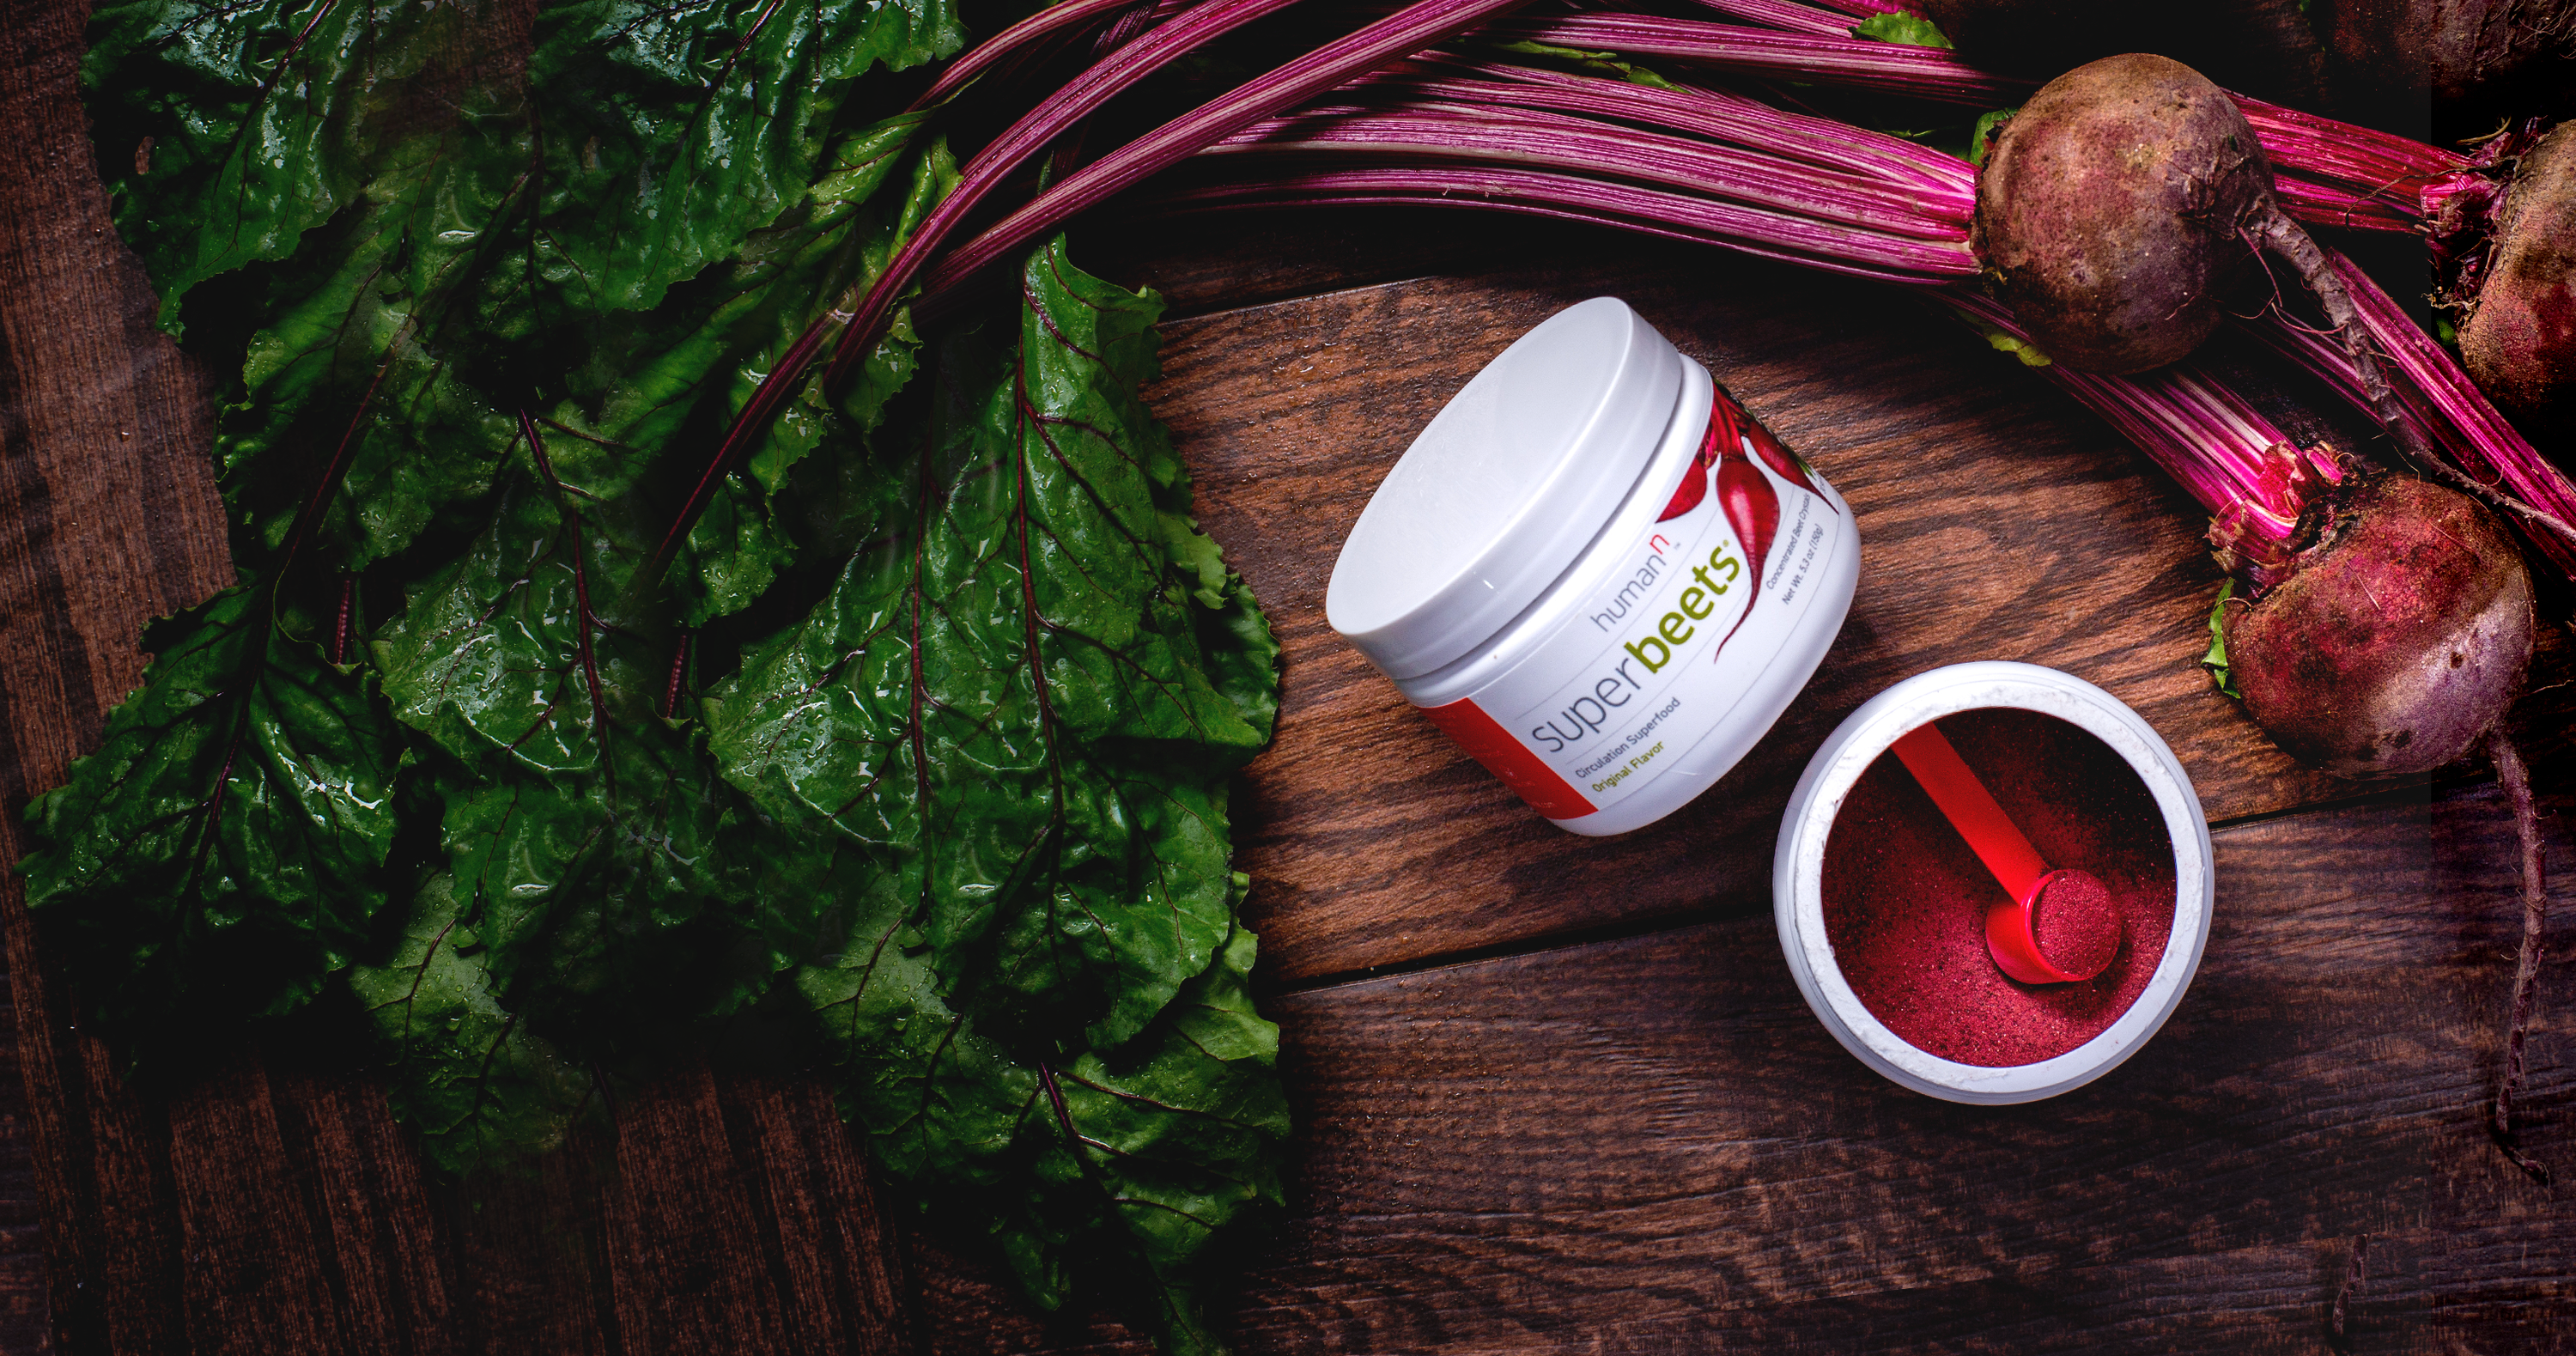 #1 Cardiologist Recommended Beet Brand*